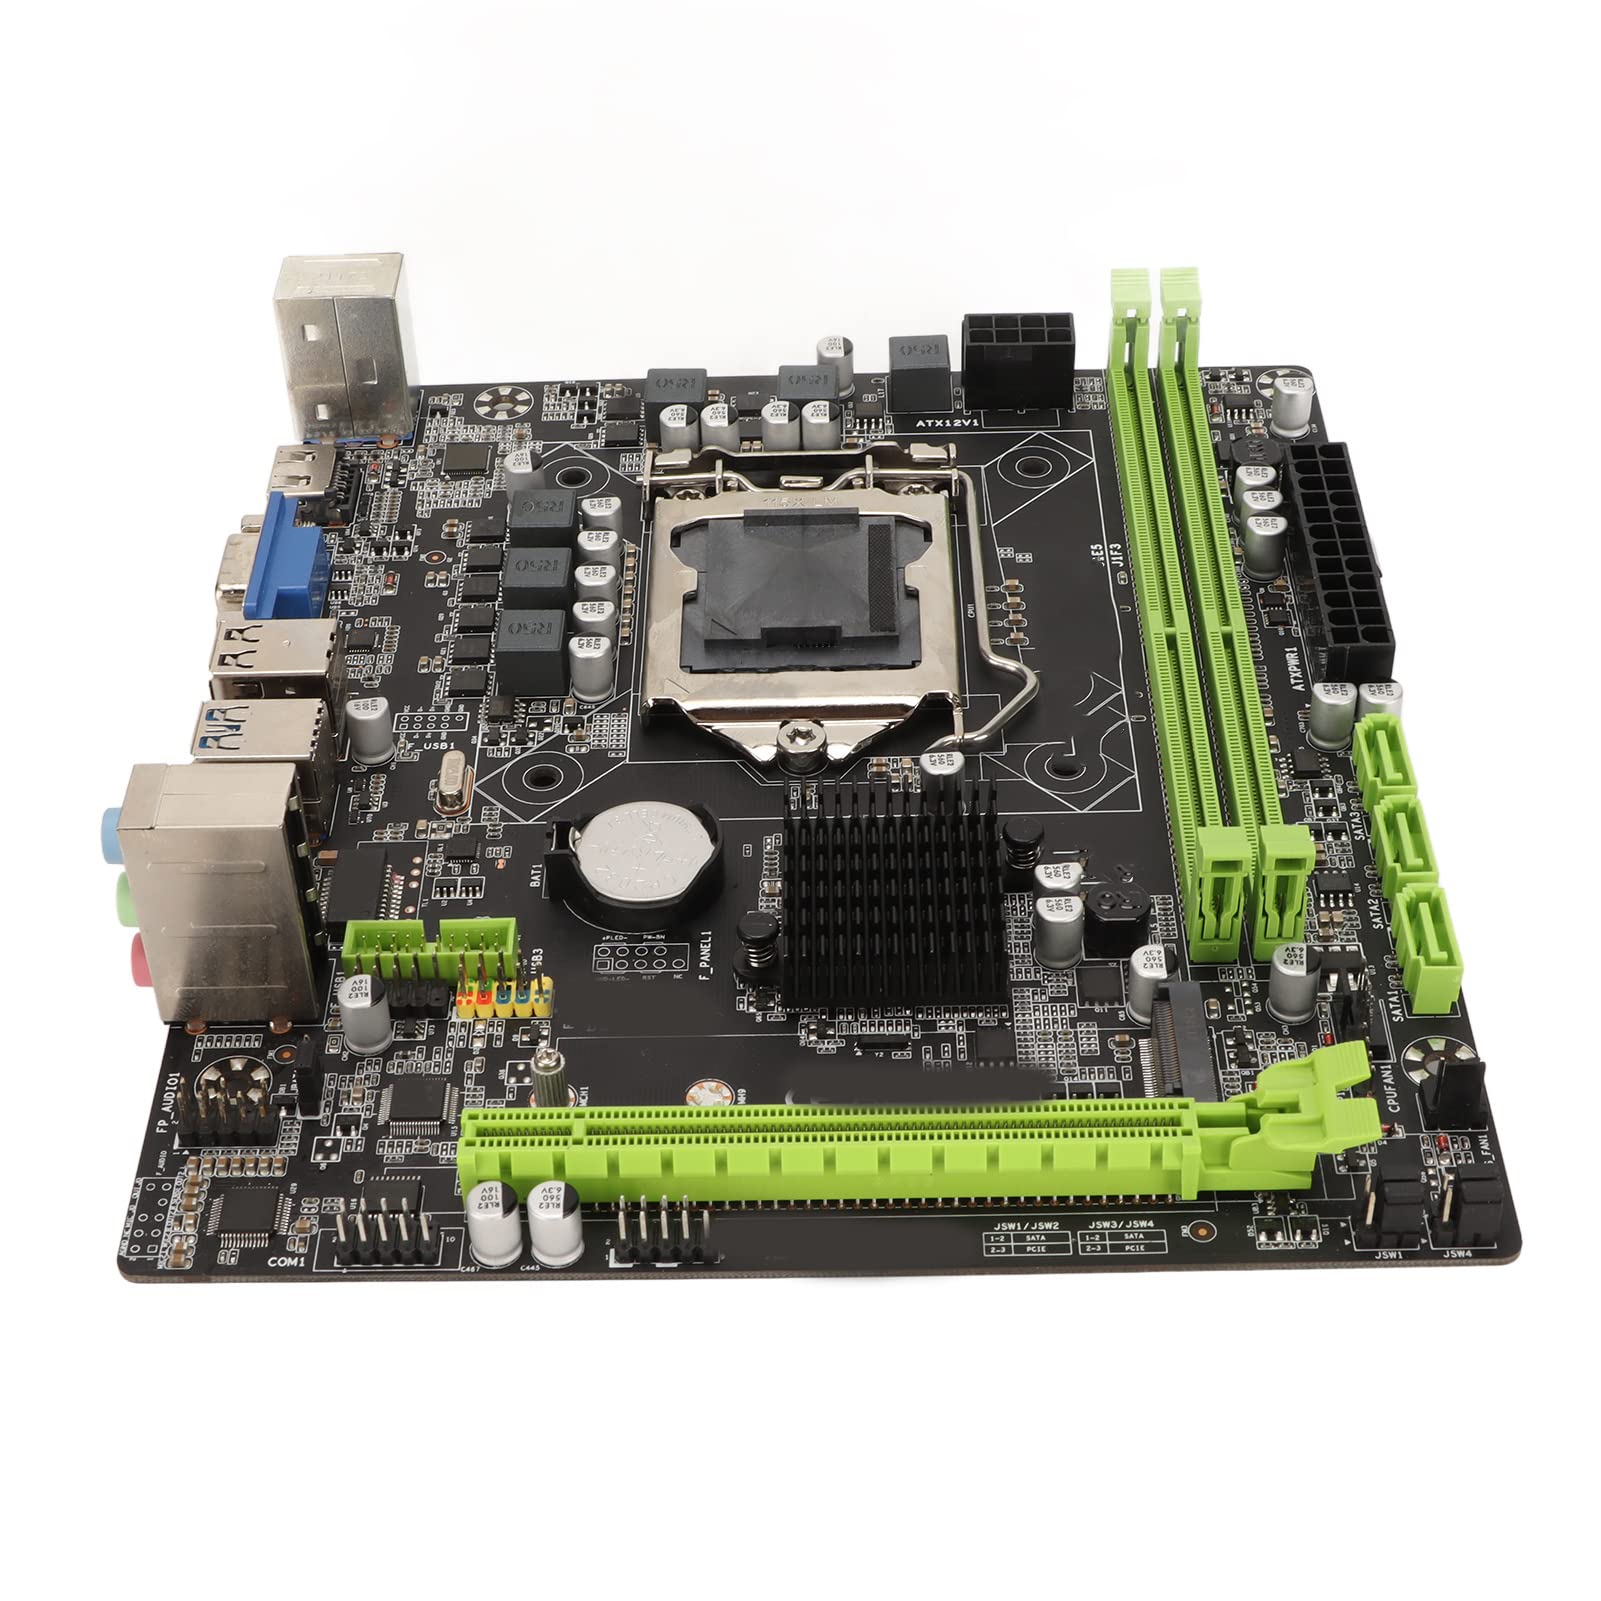 Motherboard Innovations: The Latest Advances in PC Hardware插图4